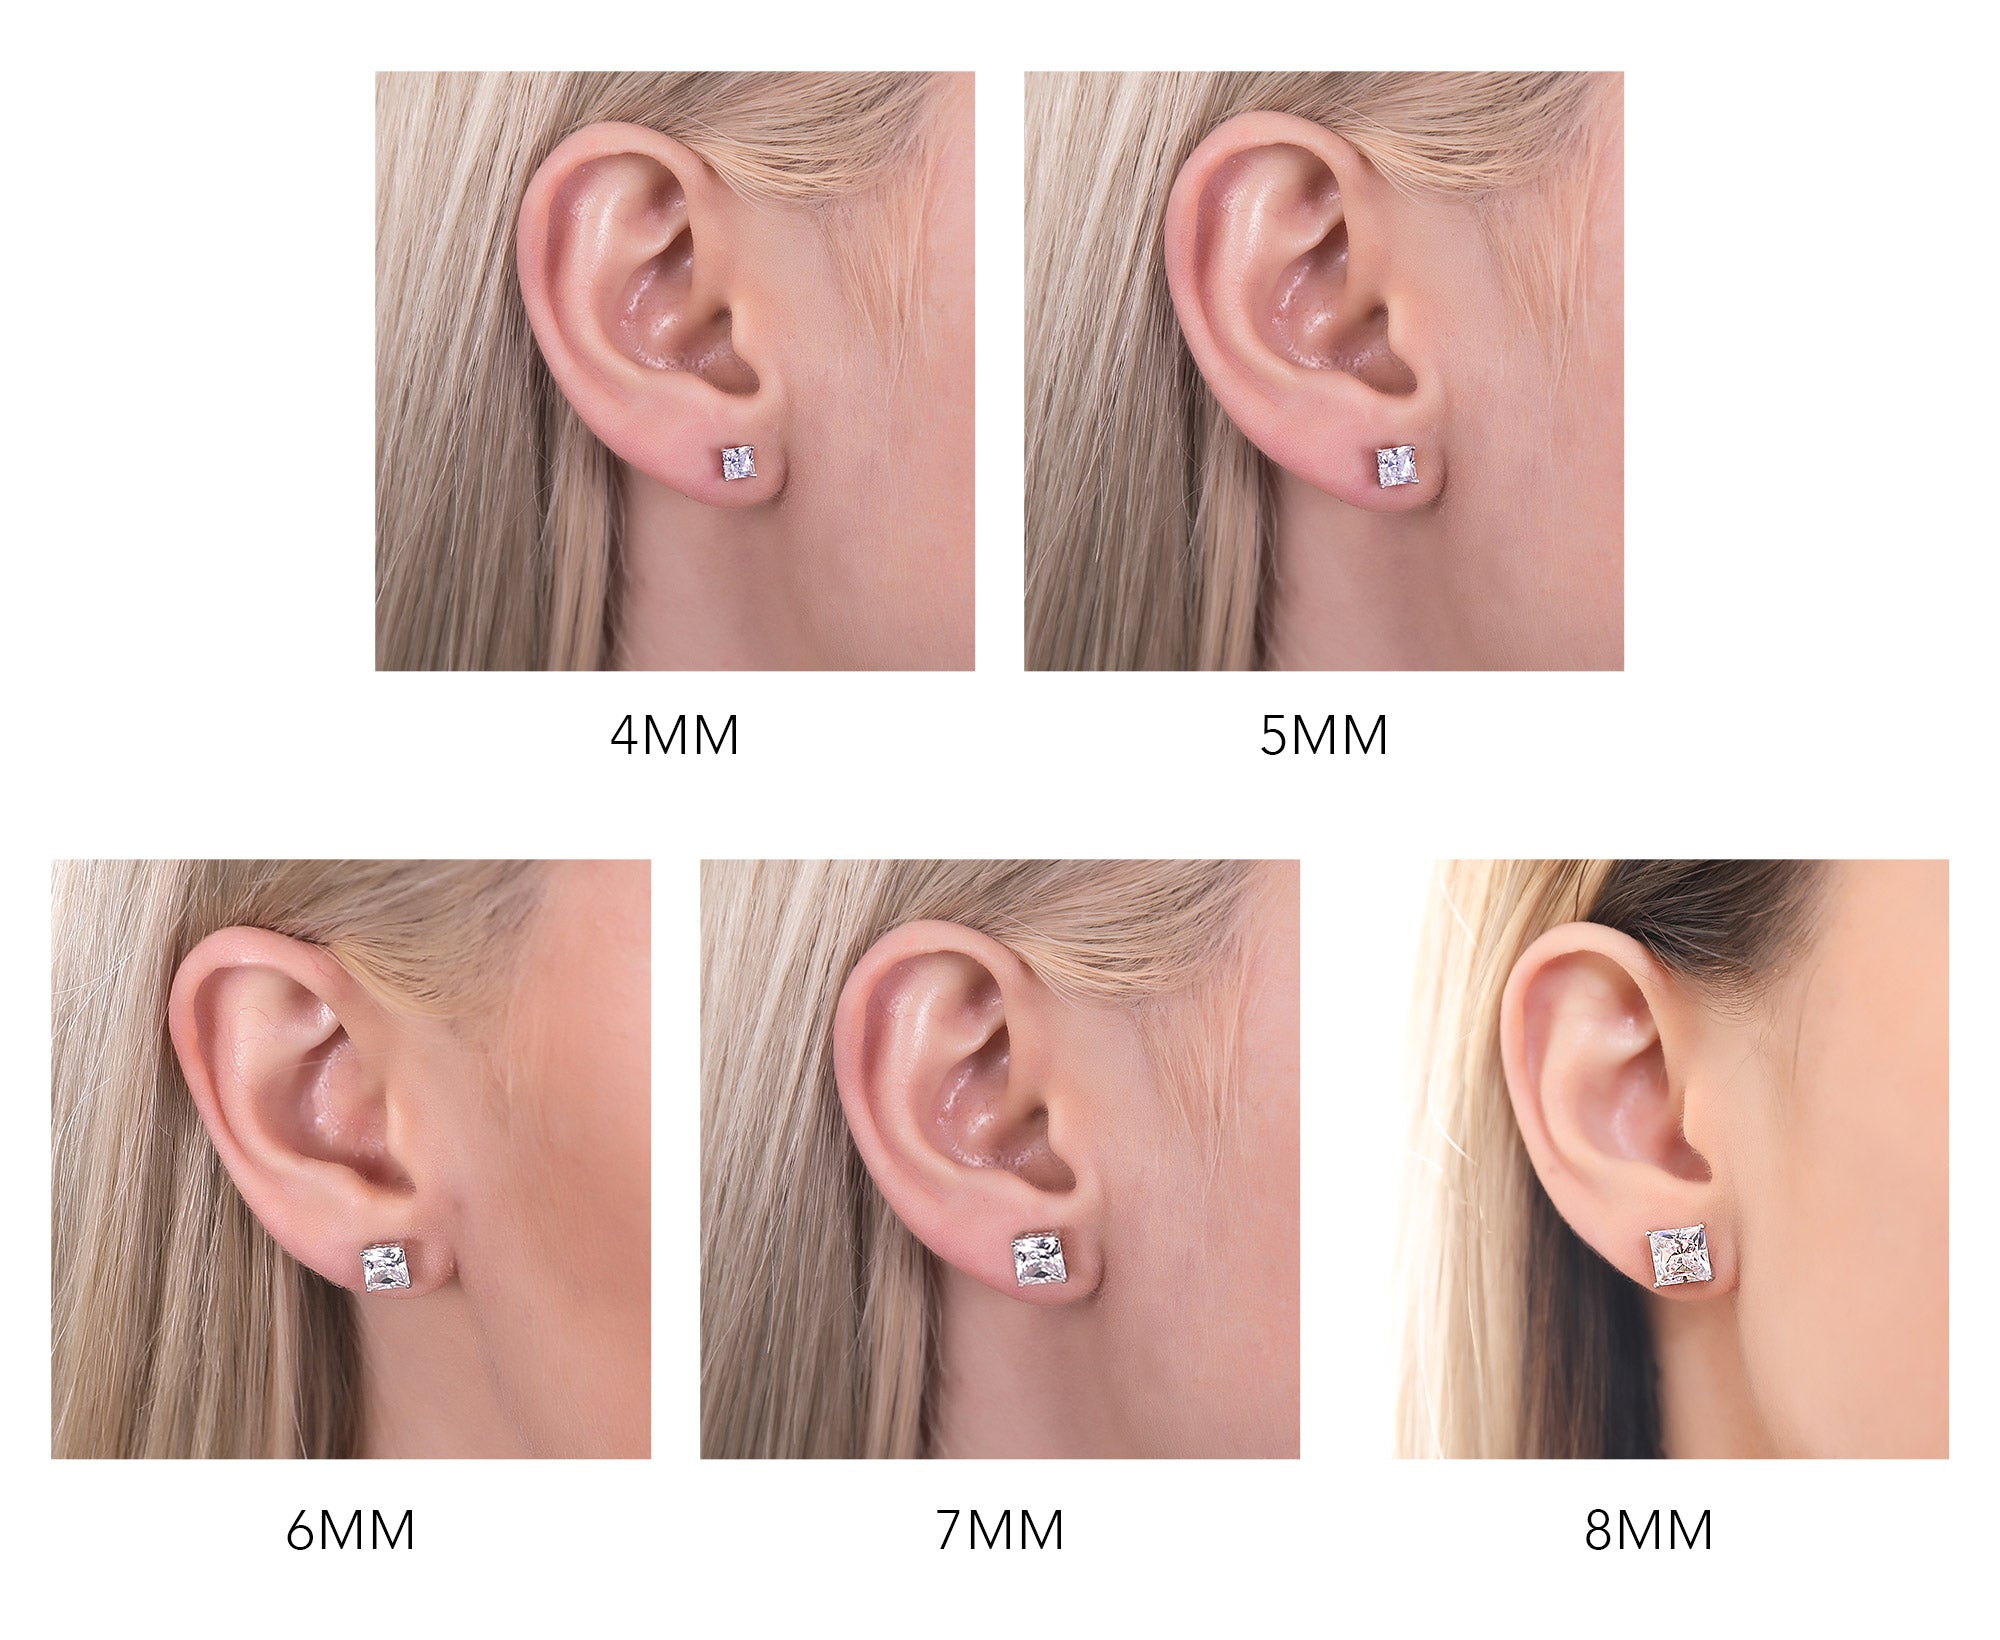 princess square stud earrings size guide chart